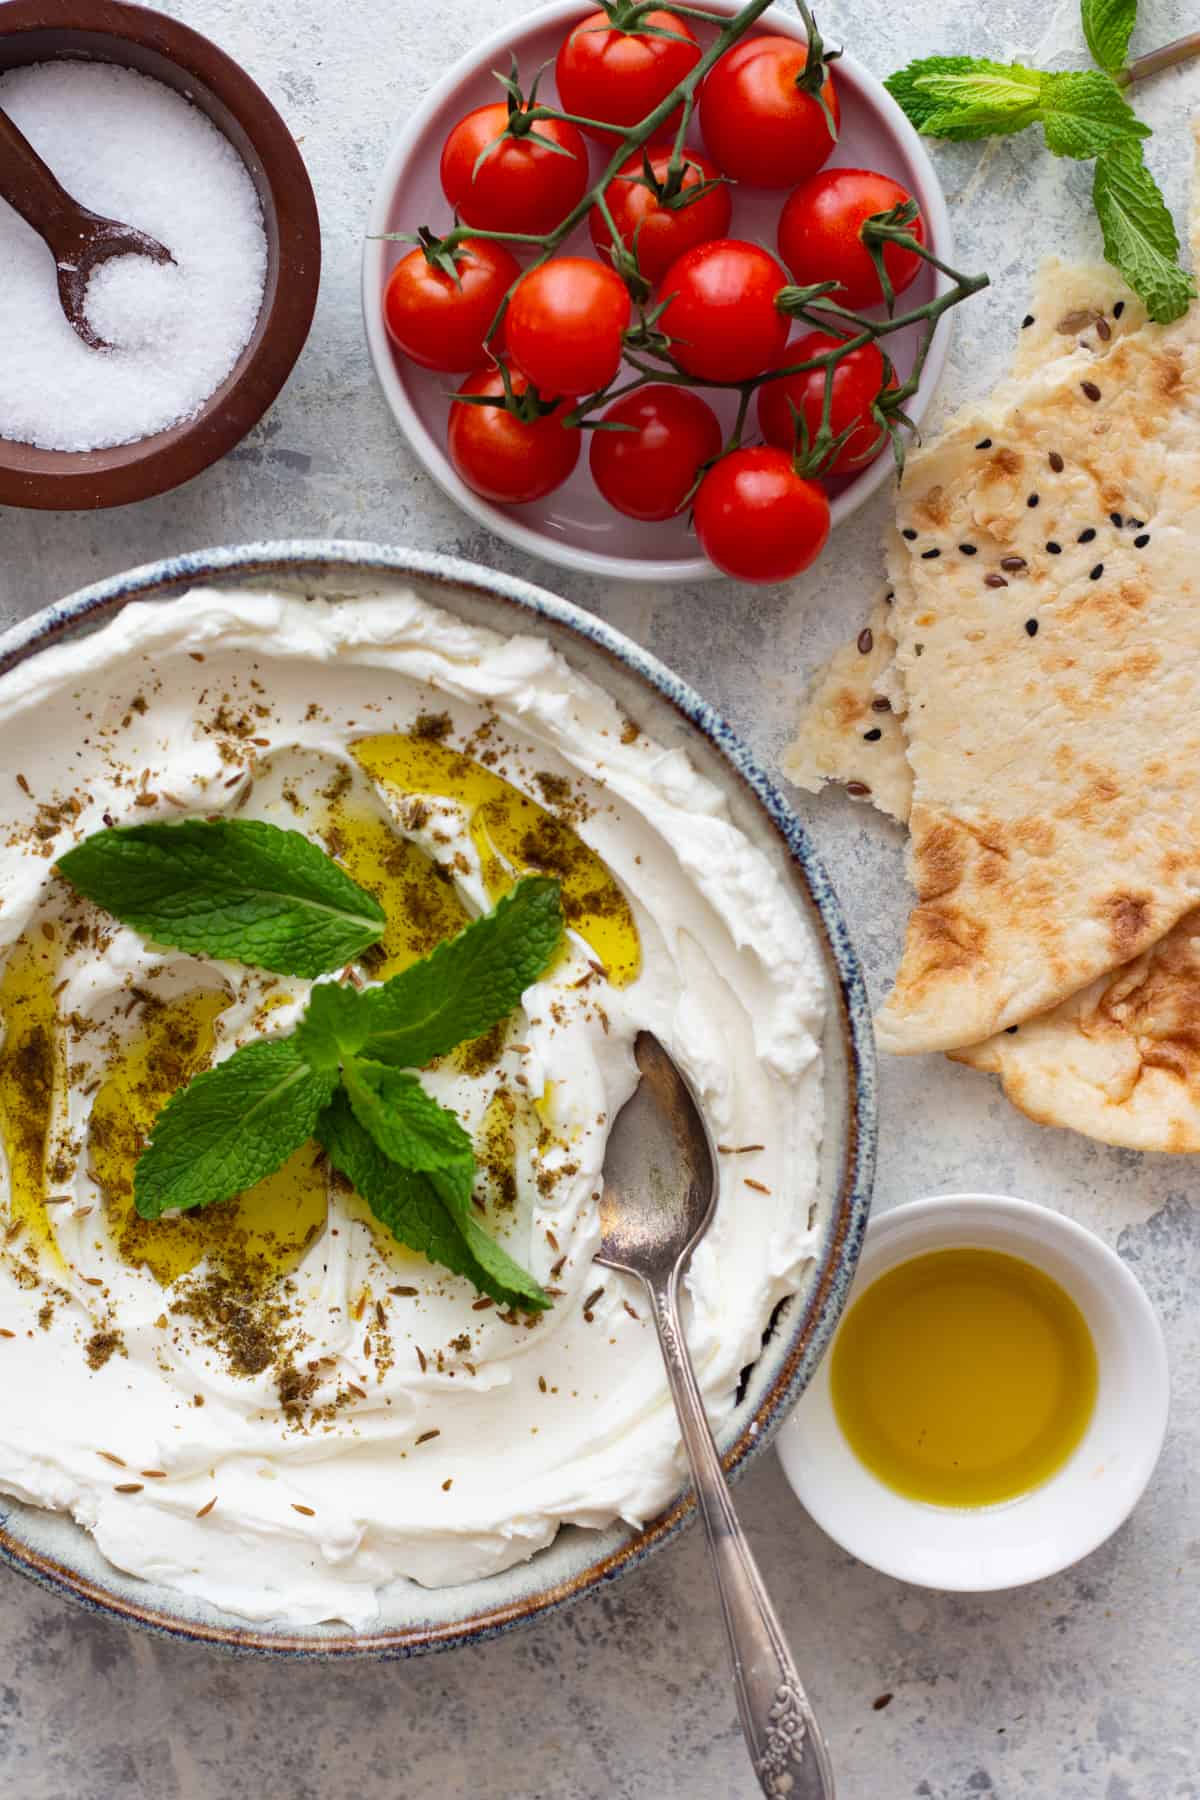 Labneh is a rich and creamy yogurt cheese from the Middle East. This easy recipe results in a tangy spread that you can top with extra virgin olive oil and serve with warm pita. 
